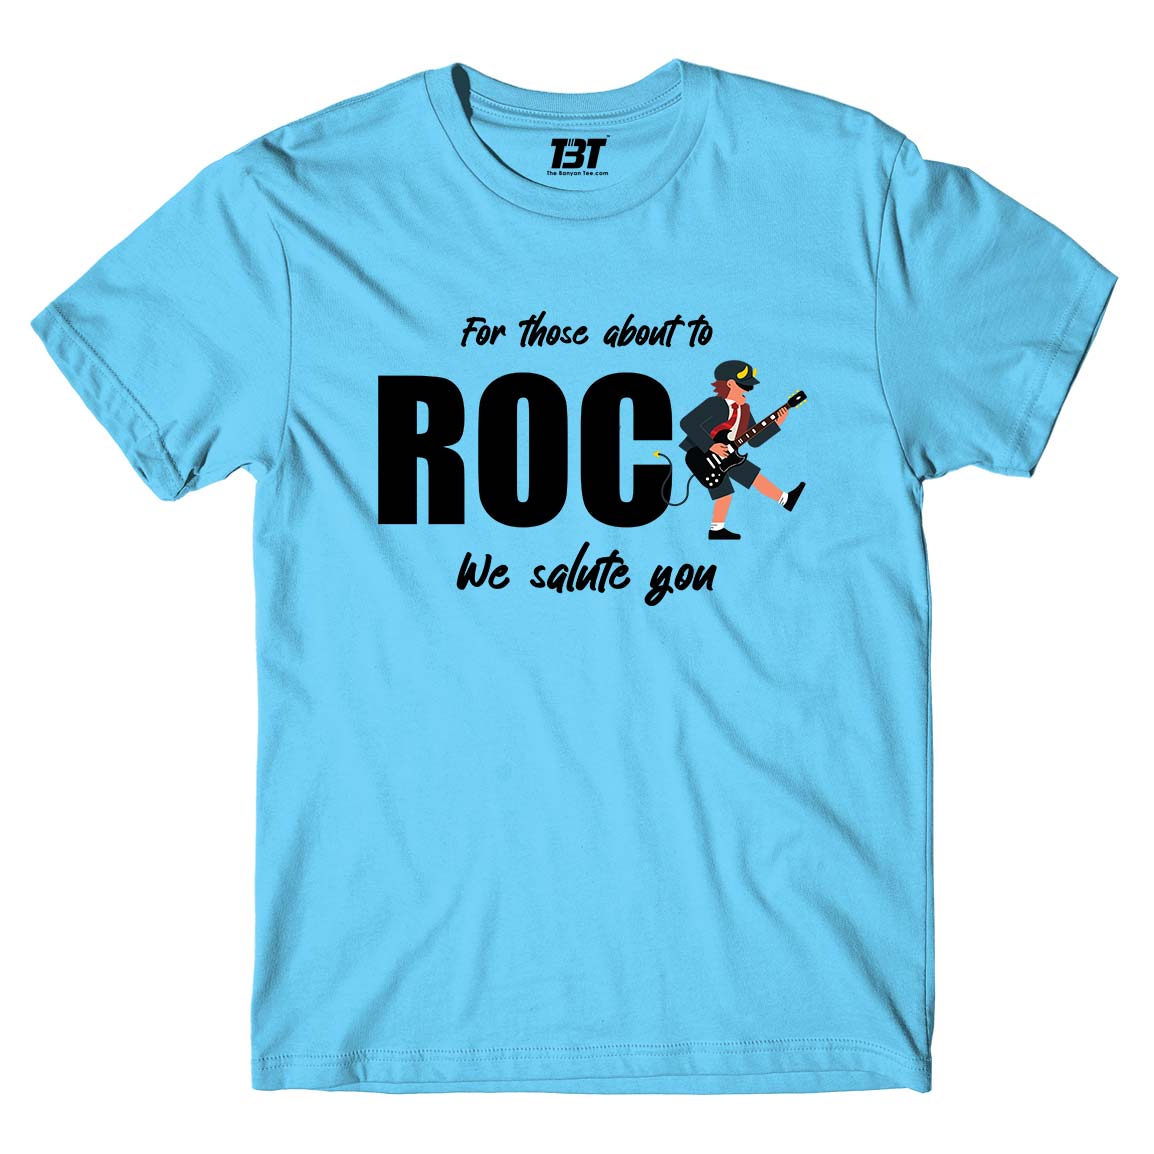 ac/dc for those about to rock t-shirt music band buy online india the banyan tee tbt men women girls boys unisex Sky Blue